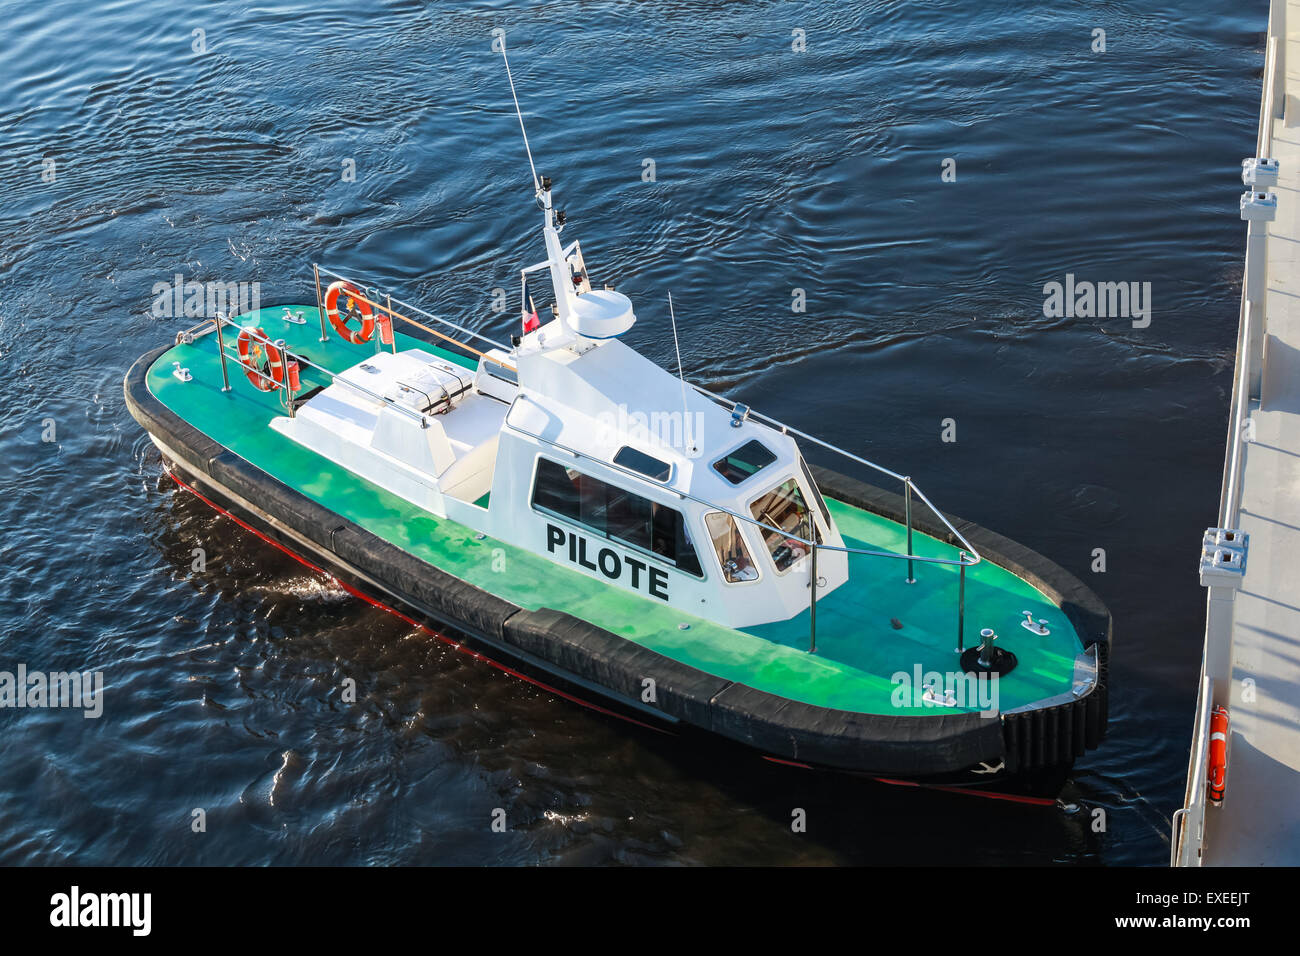 Small pilot boat with green deck and black hull on a sea water Stock Photo